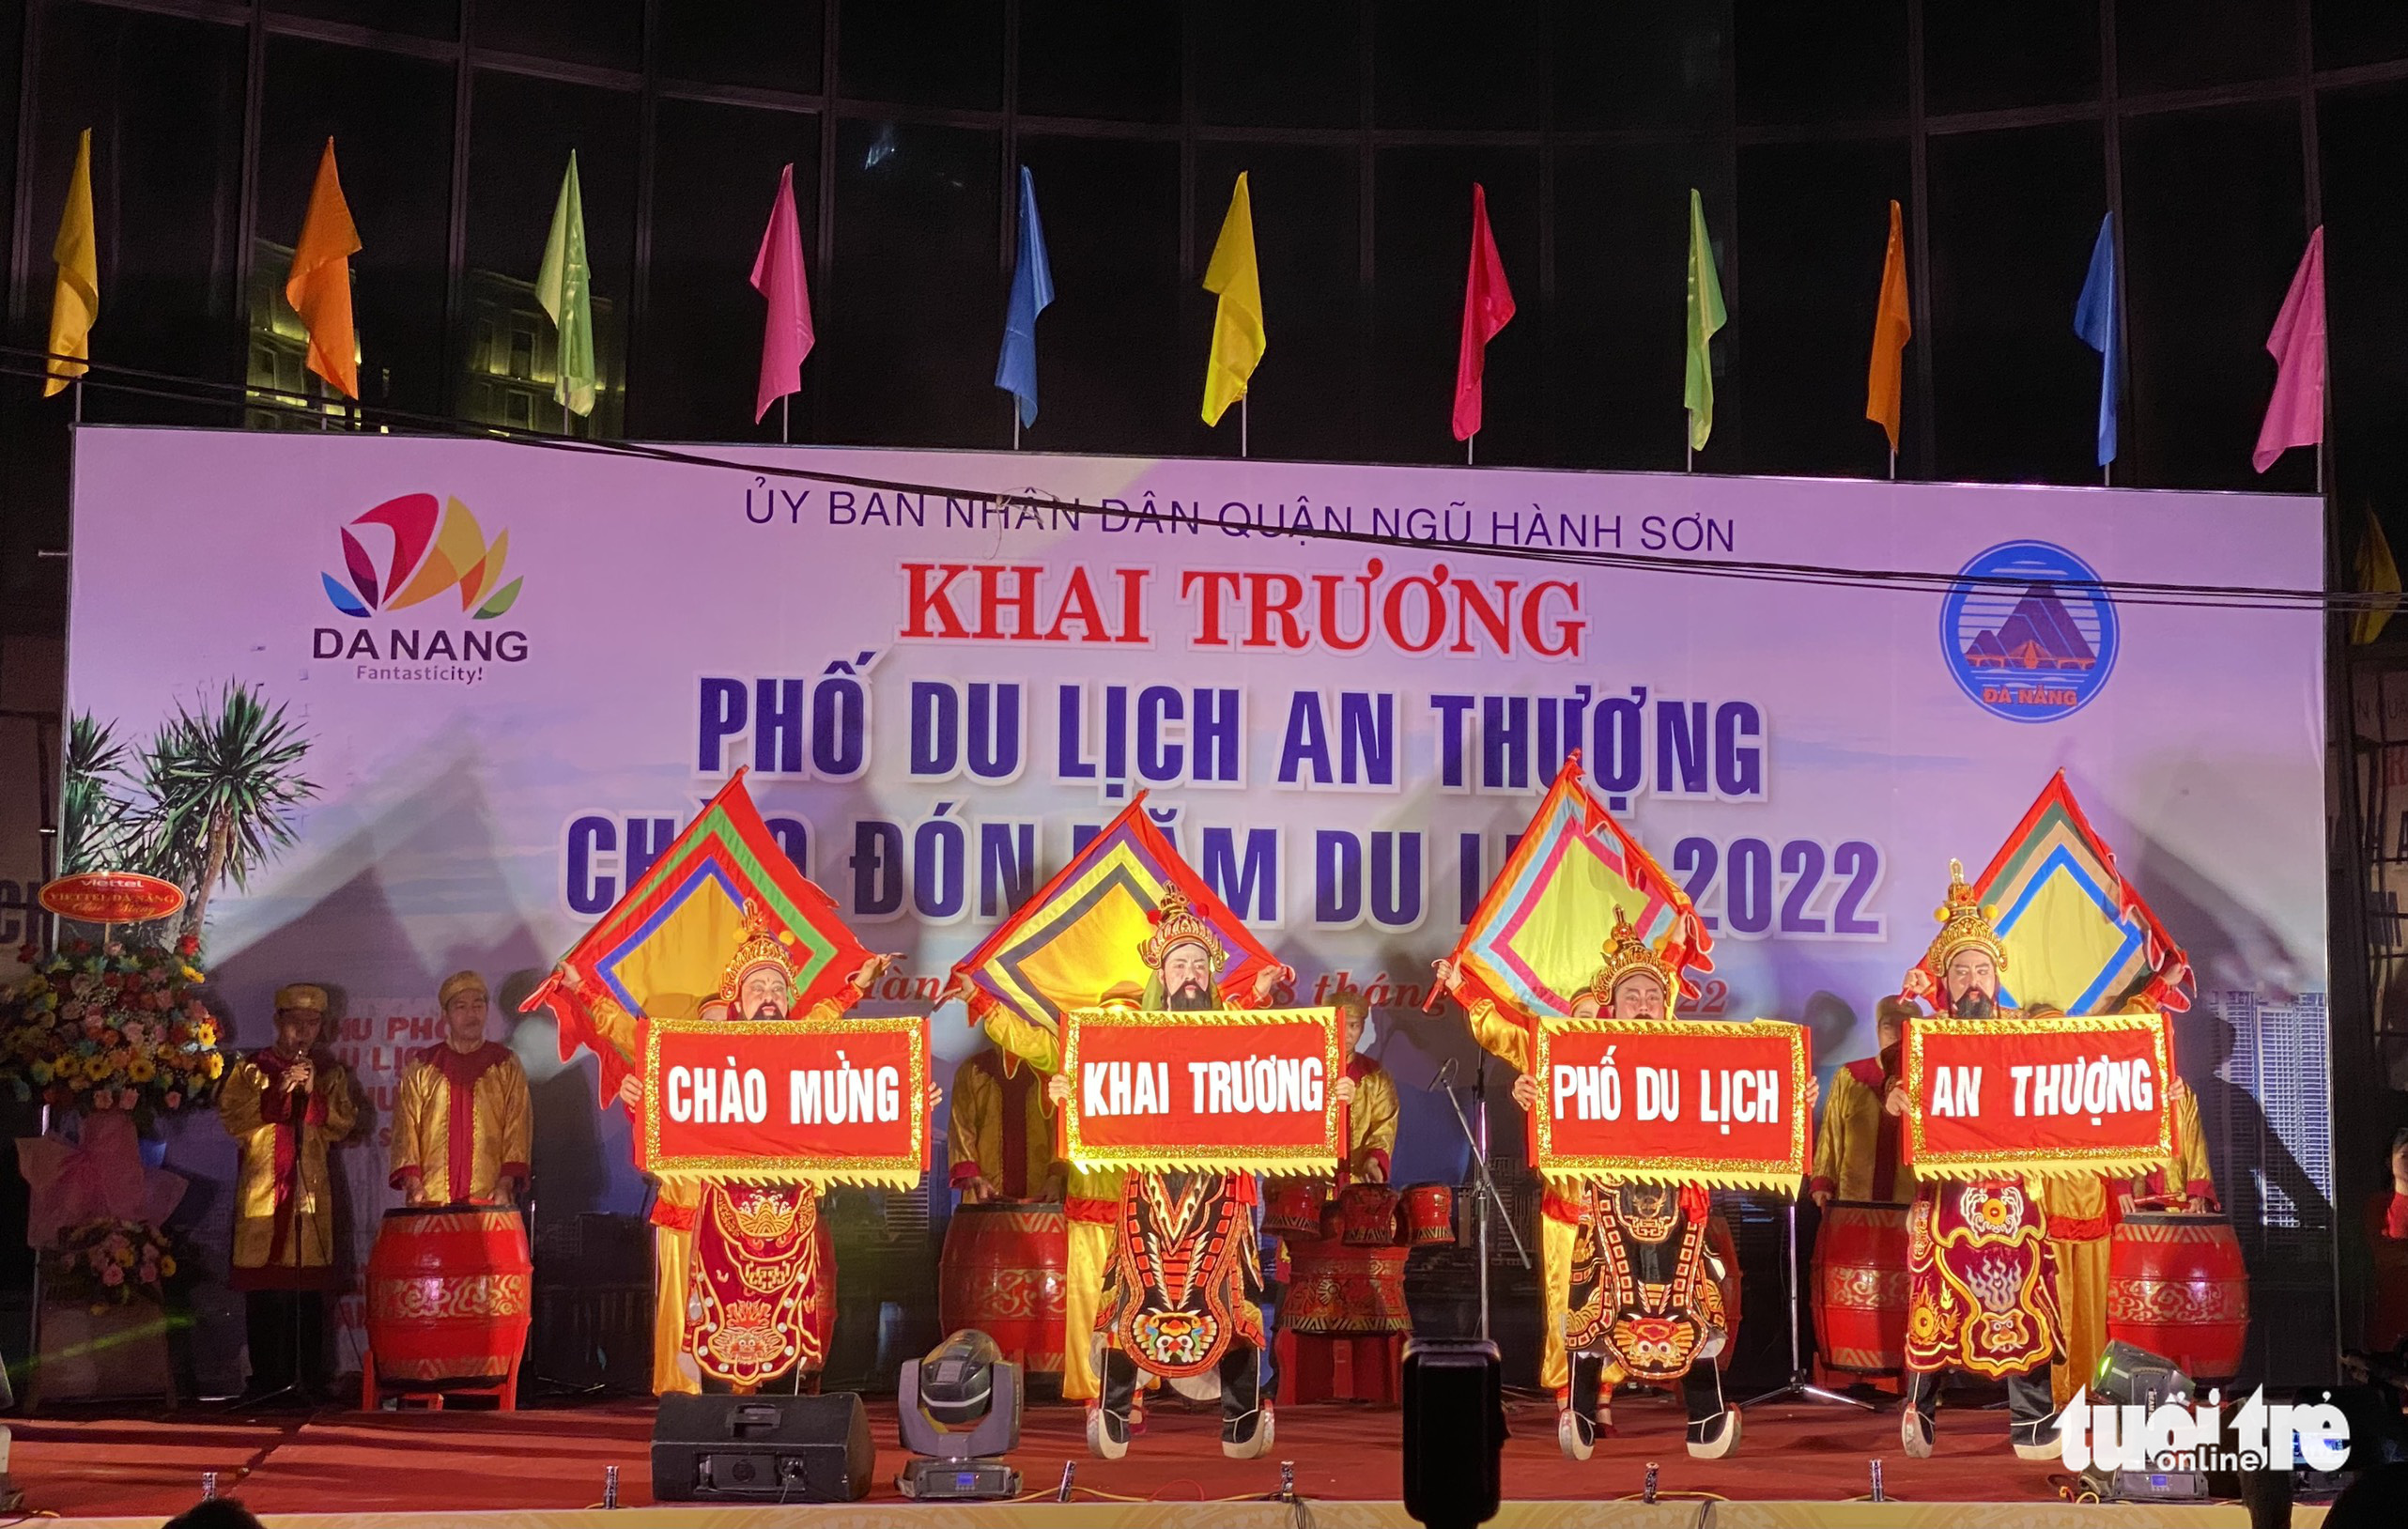 The inauguration of An Thuong night street in Ngu Hanh Son District, Da Nang, April 28, 2022. Photo: Anh Huy / Tuoi Tre